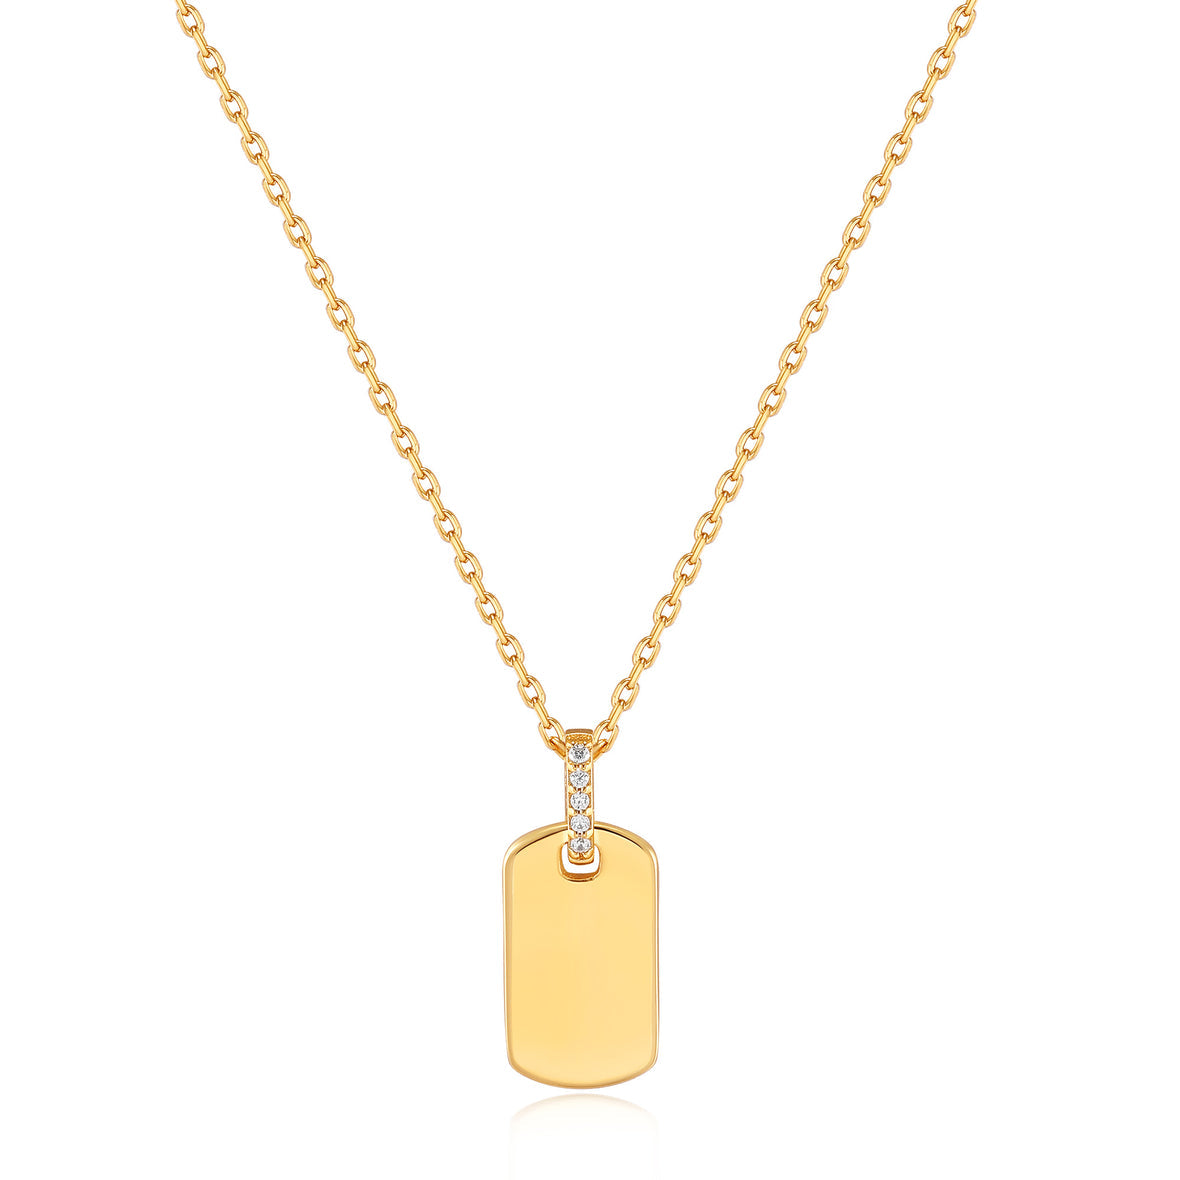 Ania Haie Gold Glam Tag Pendant Necklace - Gift Boxed